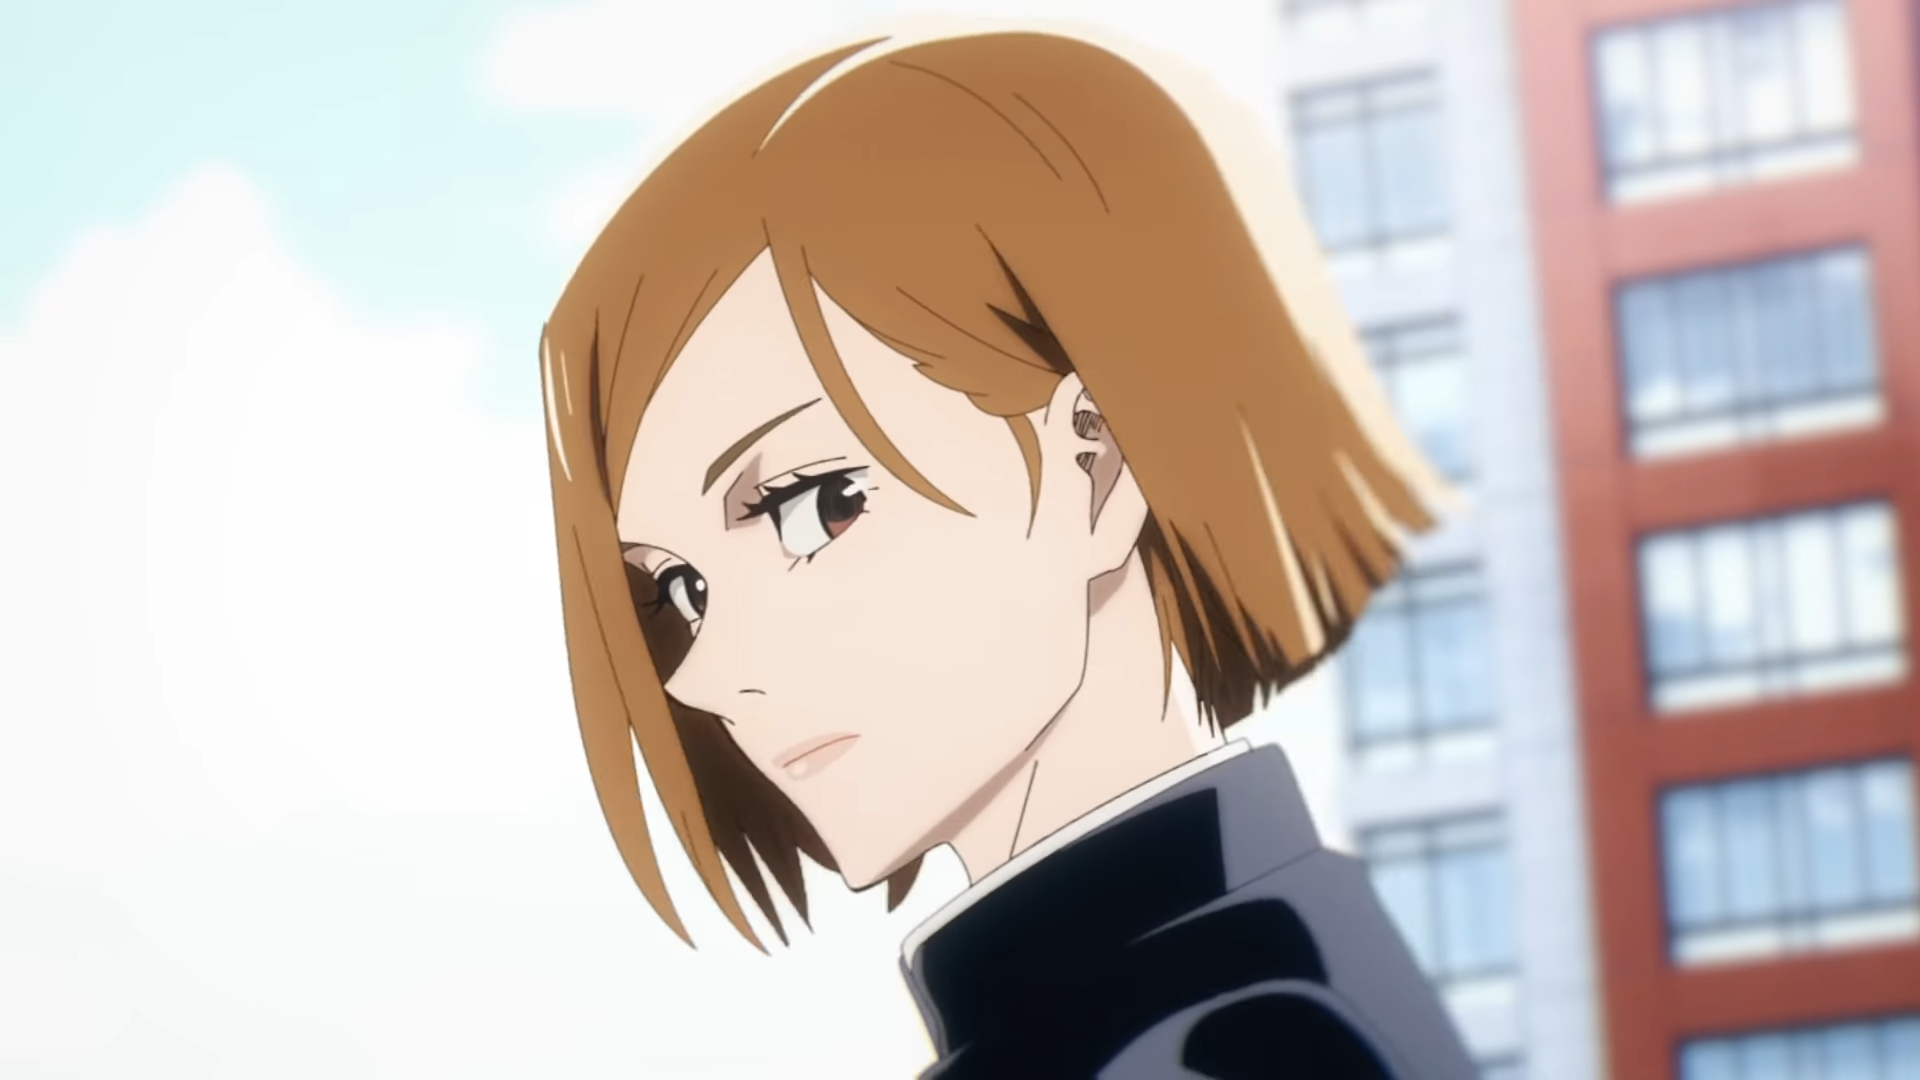 My new waifu this season (fell in love after watching the OP)